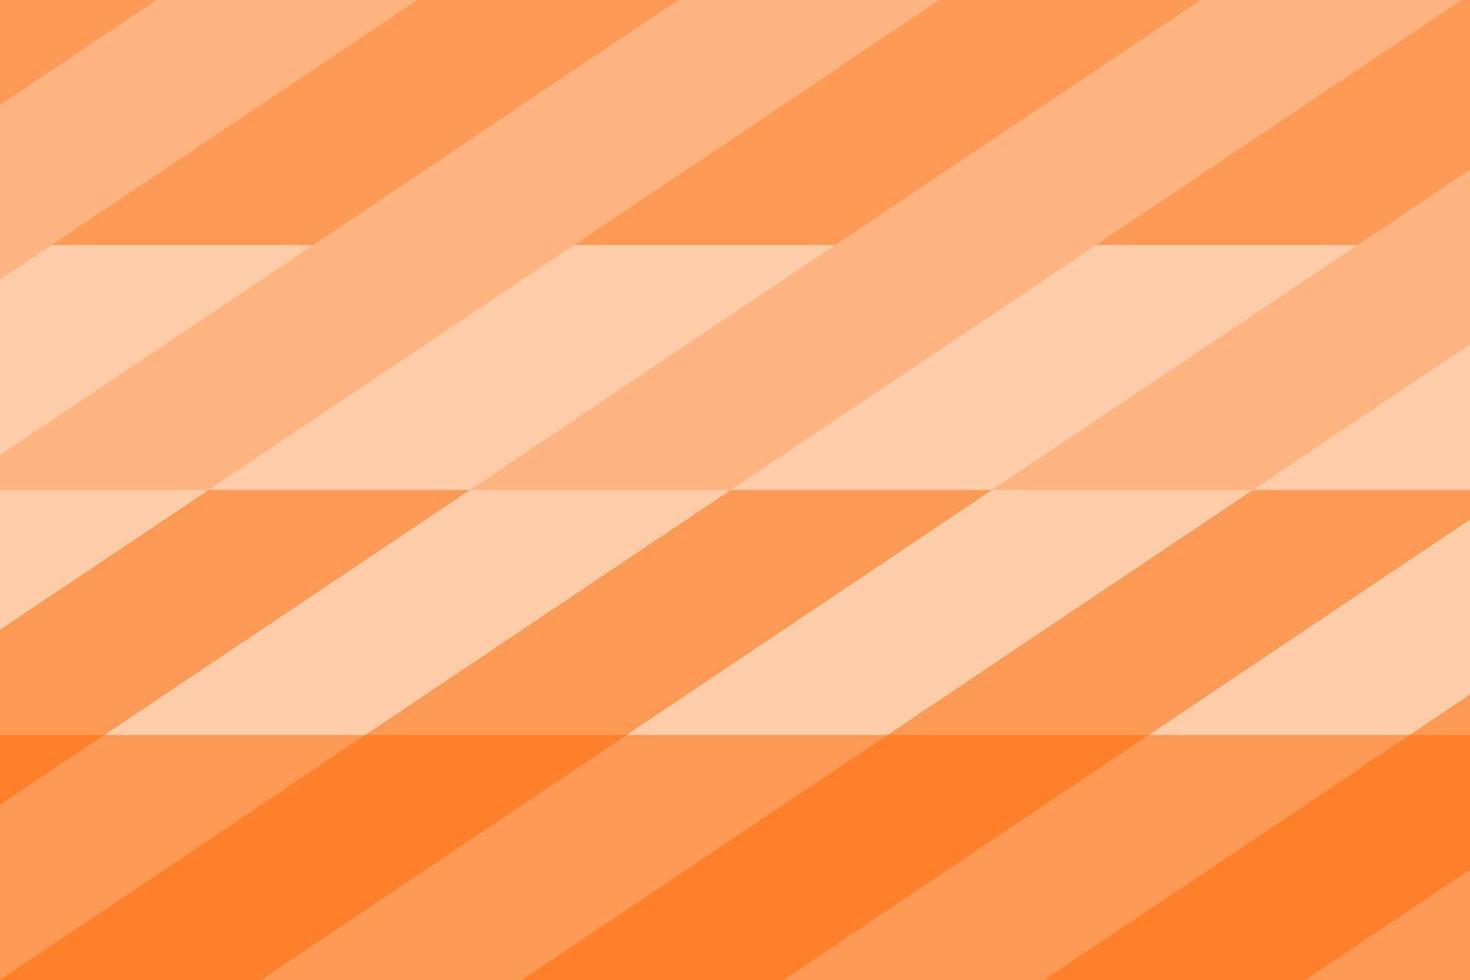 Abstract background of orange geometric shapes vector